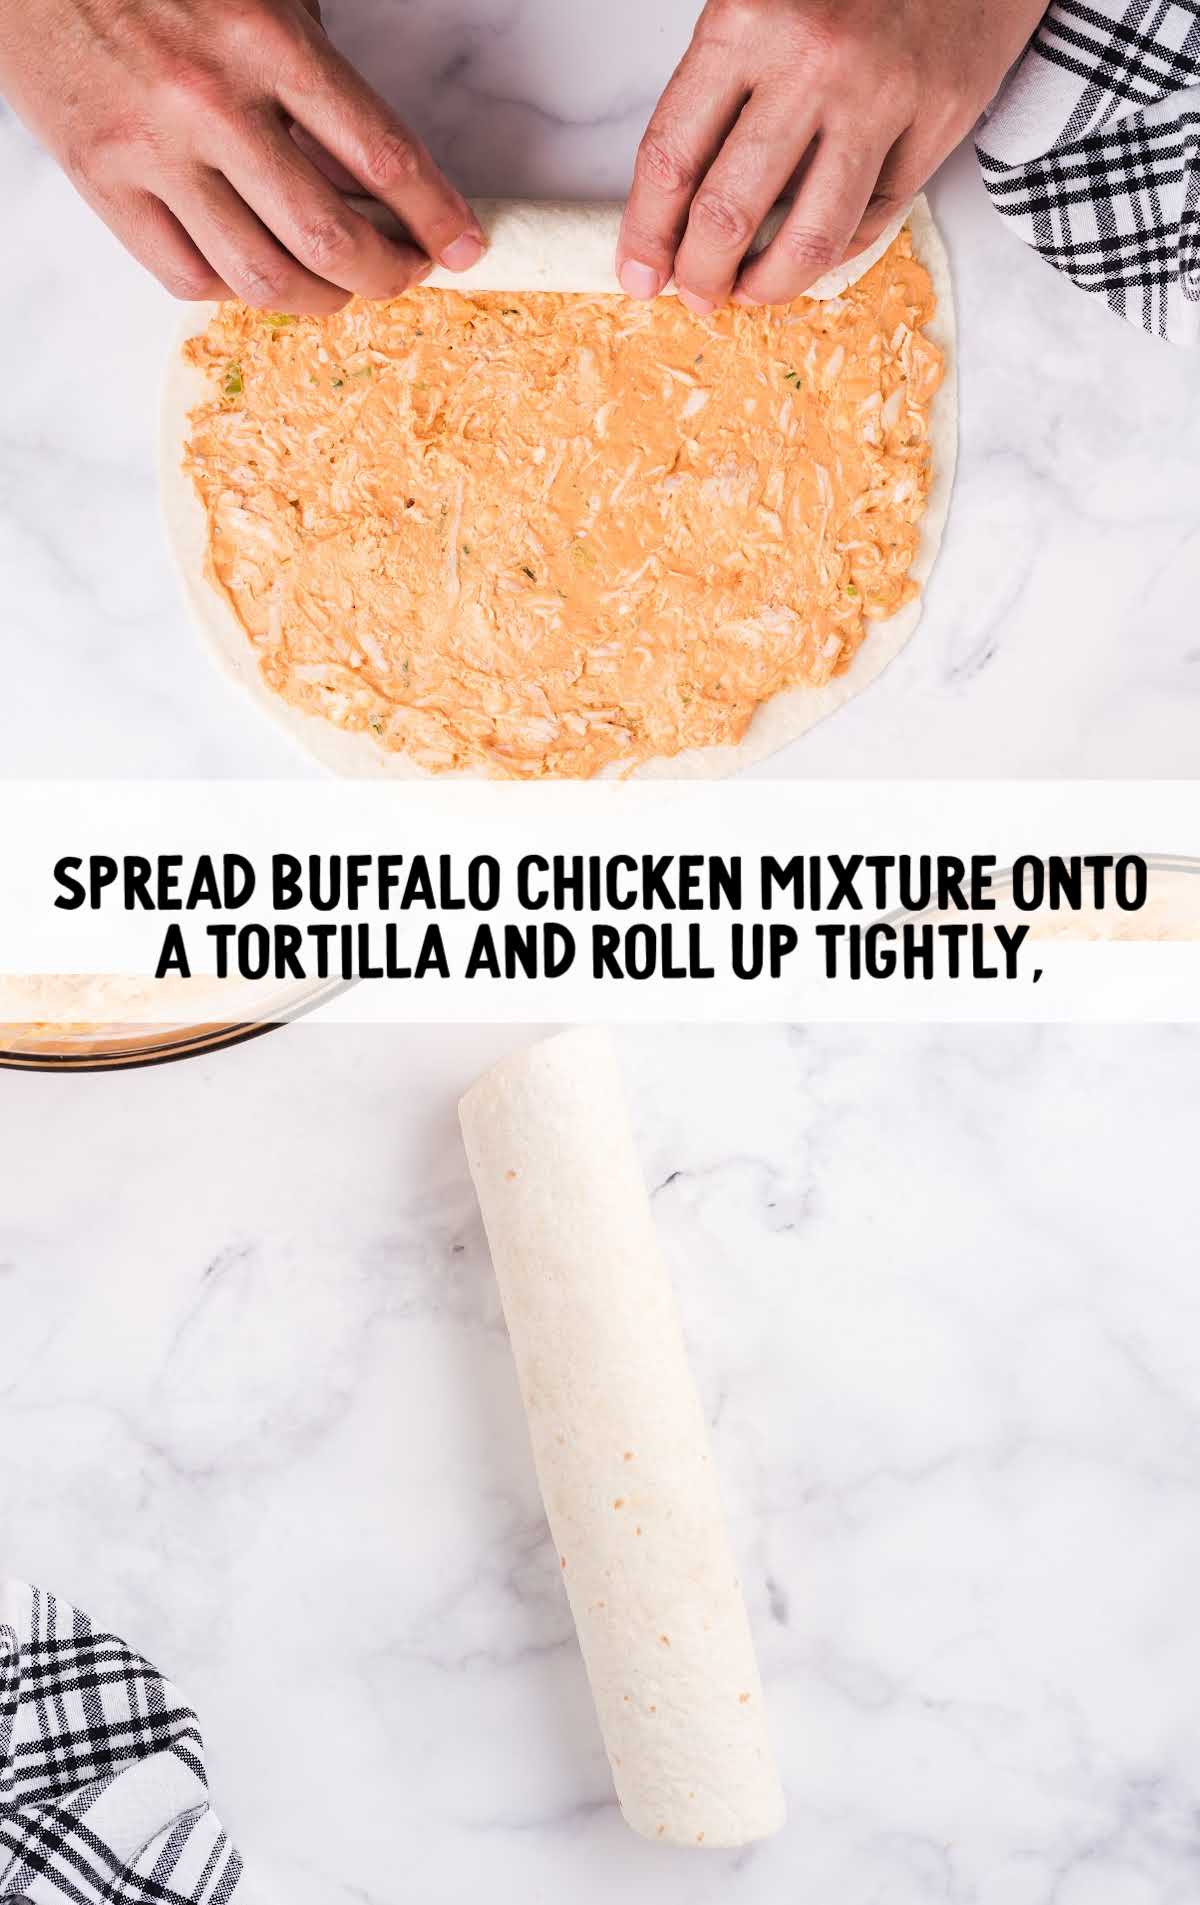 chicken being spread onto tortilla and then tightly rolled